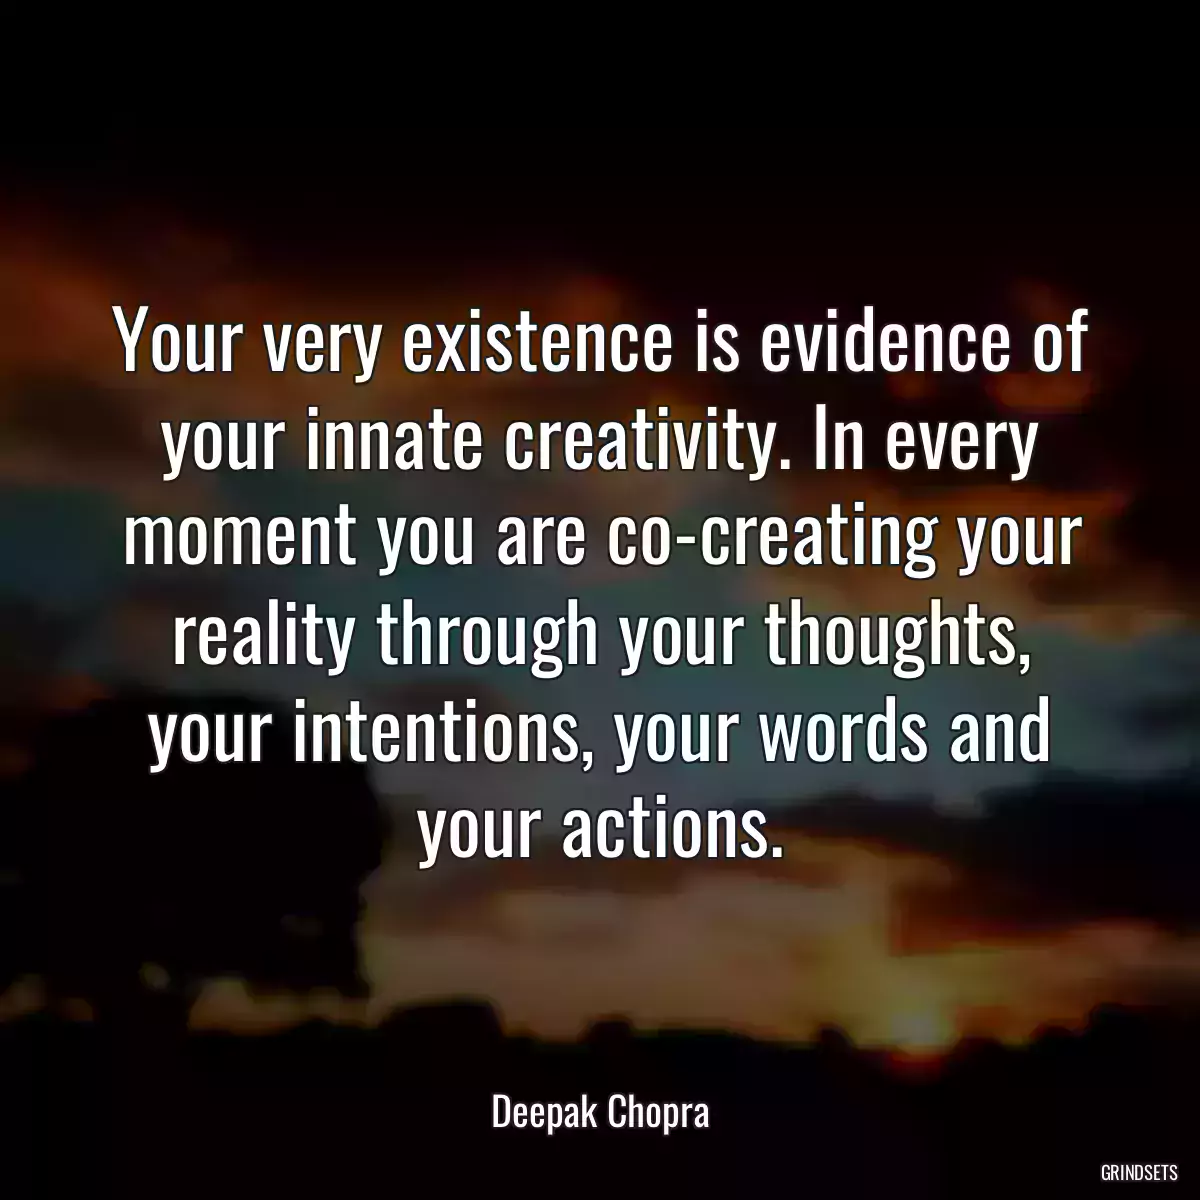 Your very existence is evidence of your innate creativity. In every moment you are co-creating your reality through your thoughts, your intentions, your words and your actions.